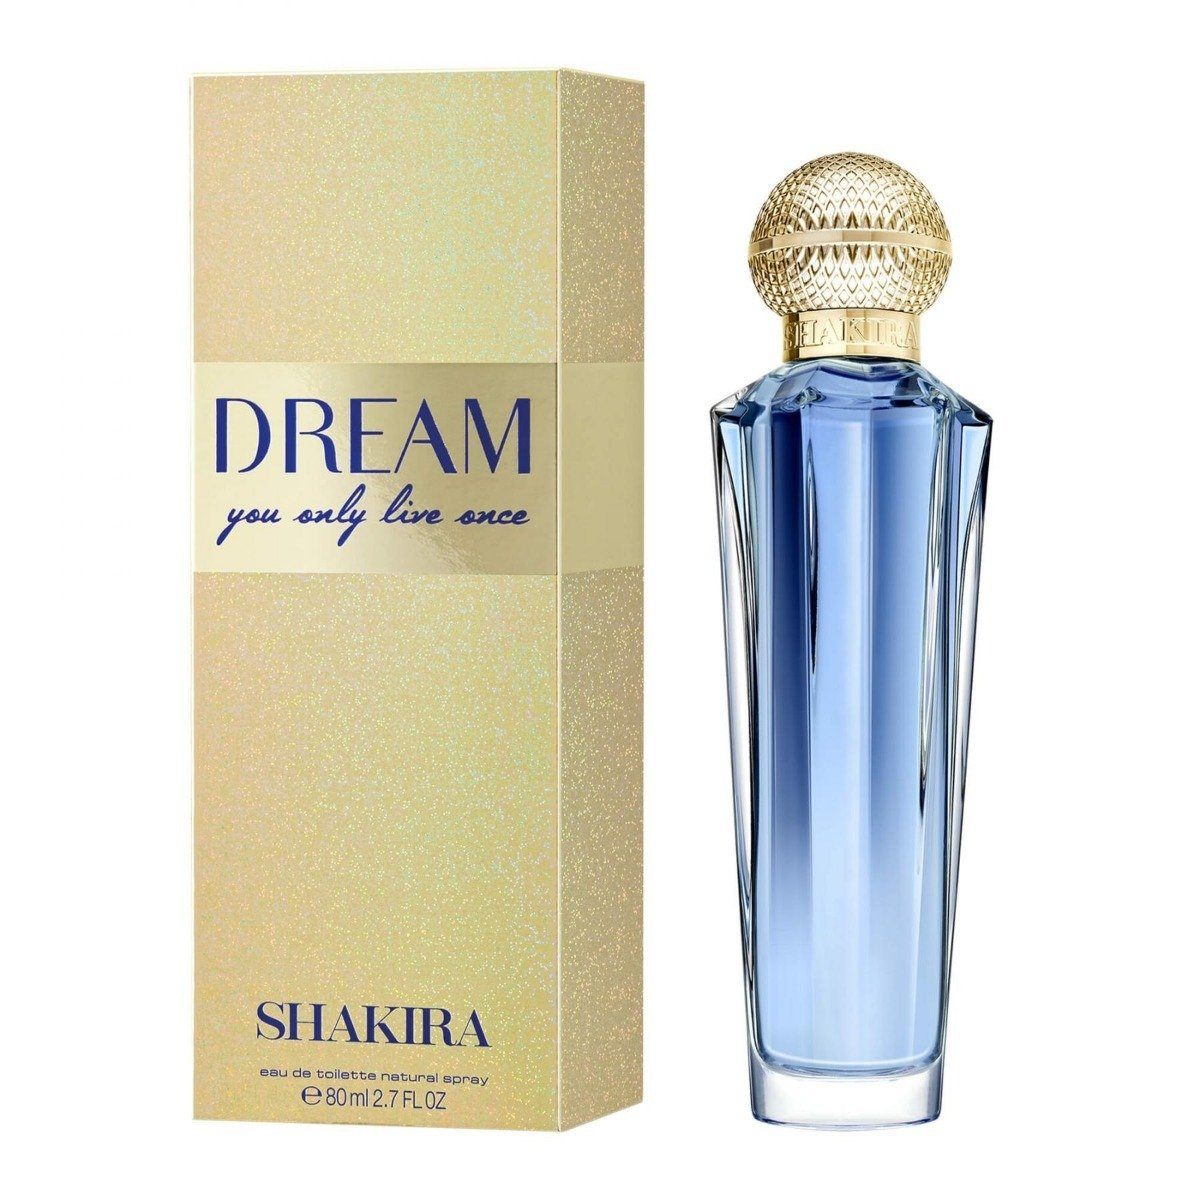 The new Dream Shakira is movement, rhythm, freedom and sensuality that will awaken your senses with its fruity floral scent. The top notes are red pepper and red orange; The heart notes are pink and caramel; and base notes are vanilla and musk